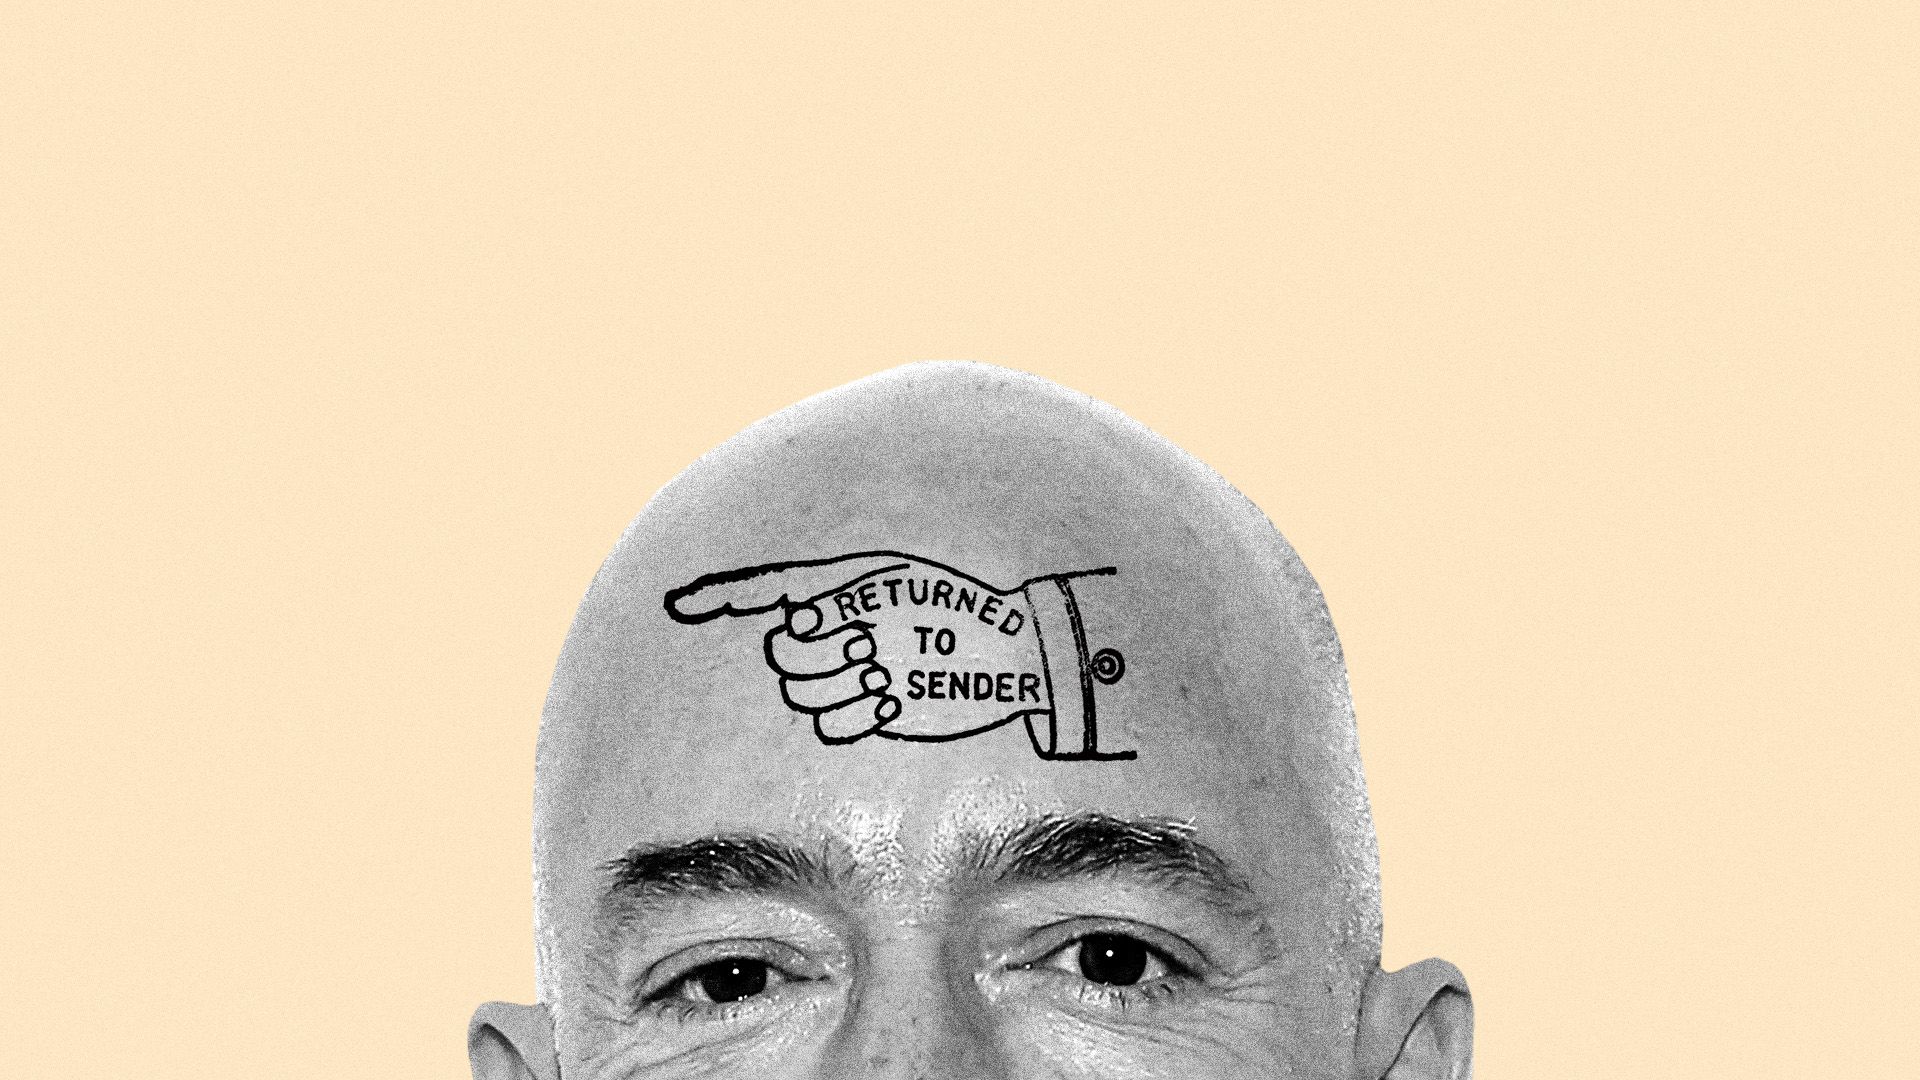 In this image, Jeff Bezo's forehead is visible against a light yellow background. A cartoon illustration on his forehead says "return to sender." 